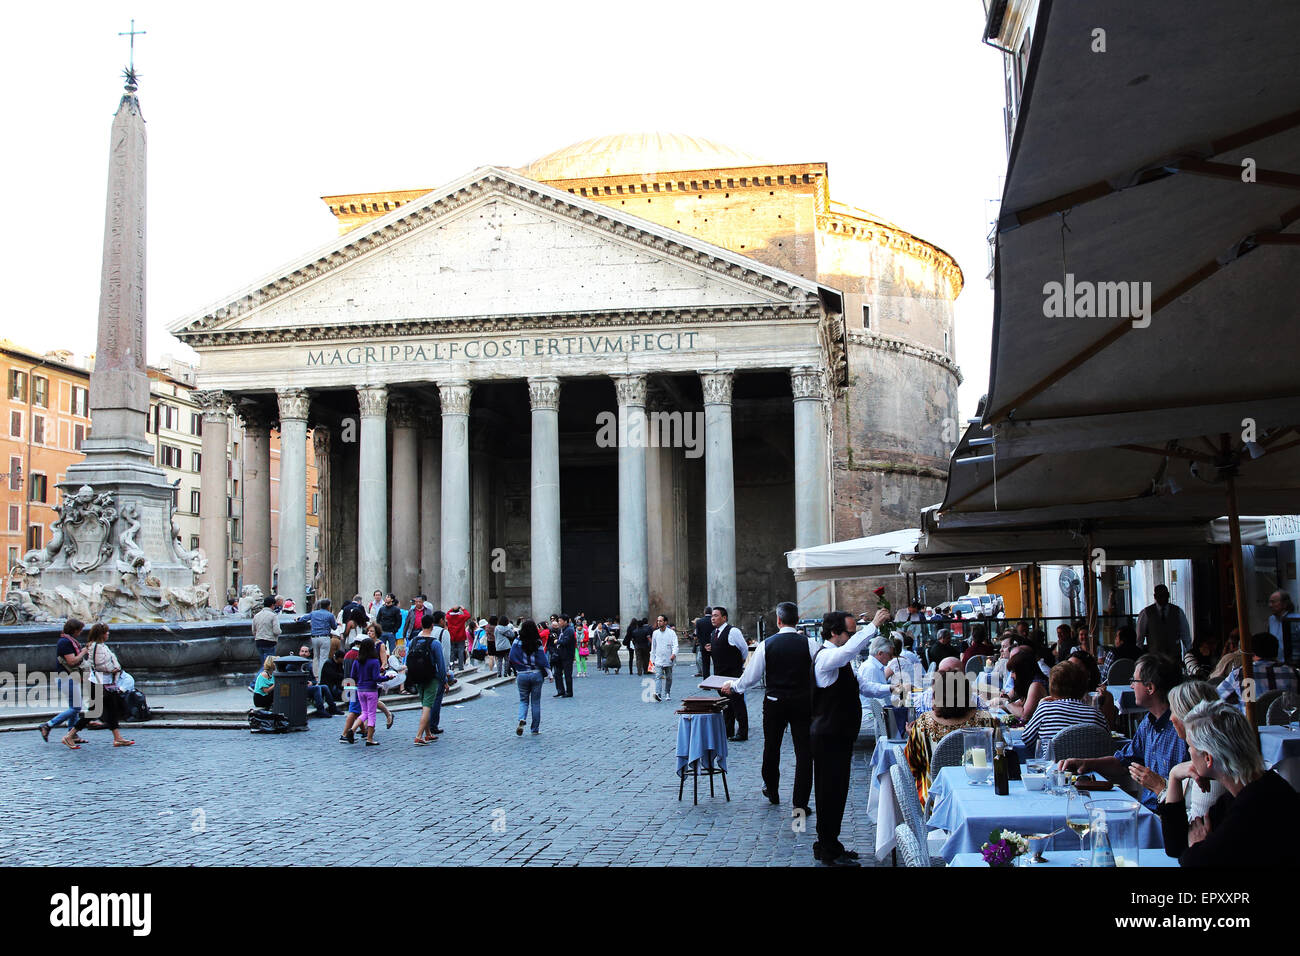 Piazza della Rotunda with the Pantheon and people enjoying the view from an outdoor restaurant in Rome. Stock Photo